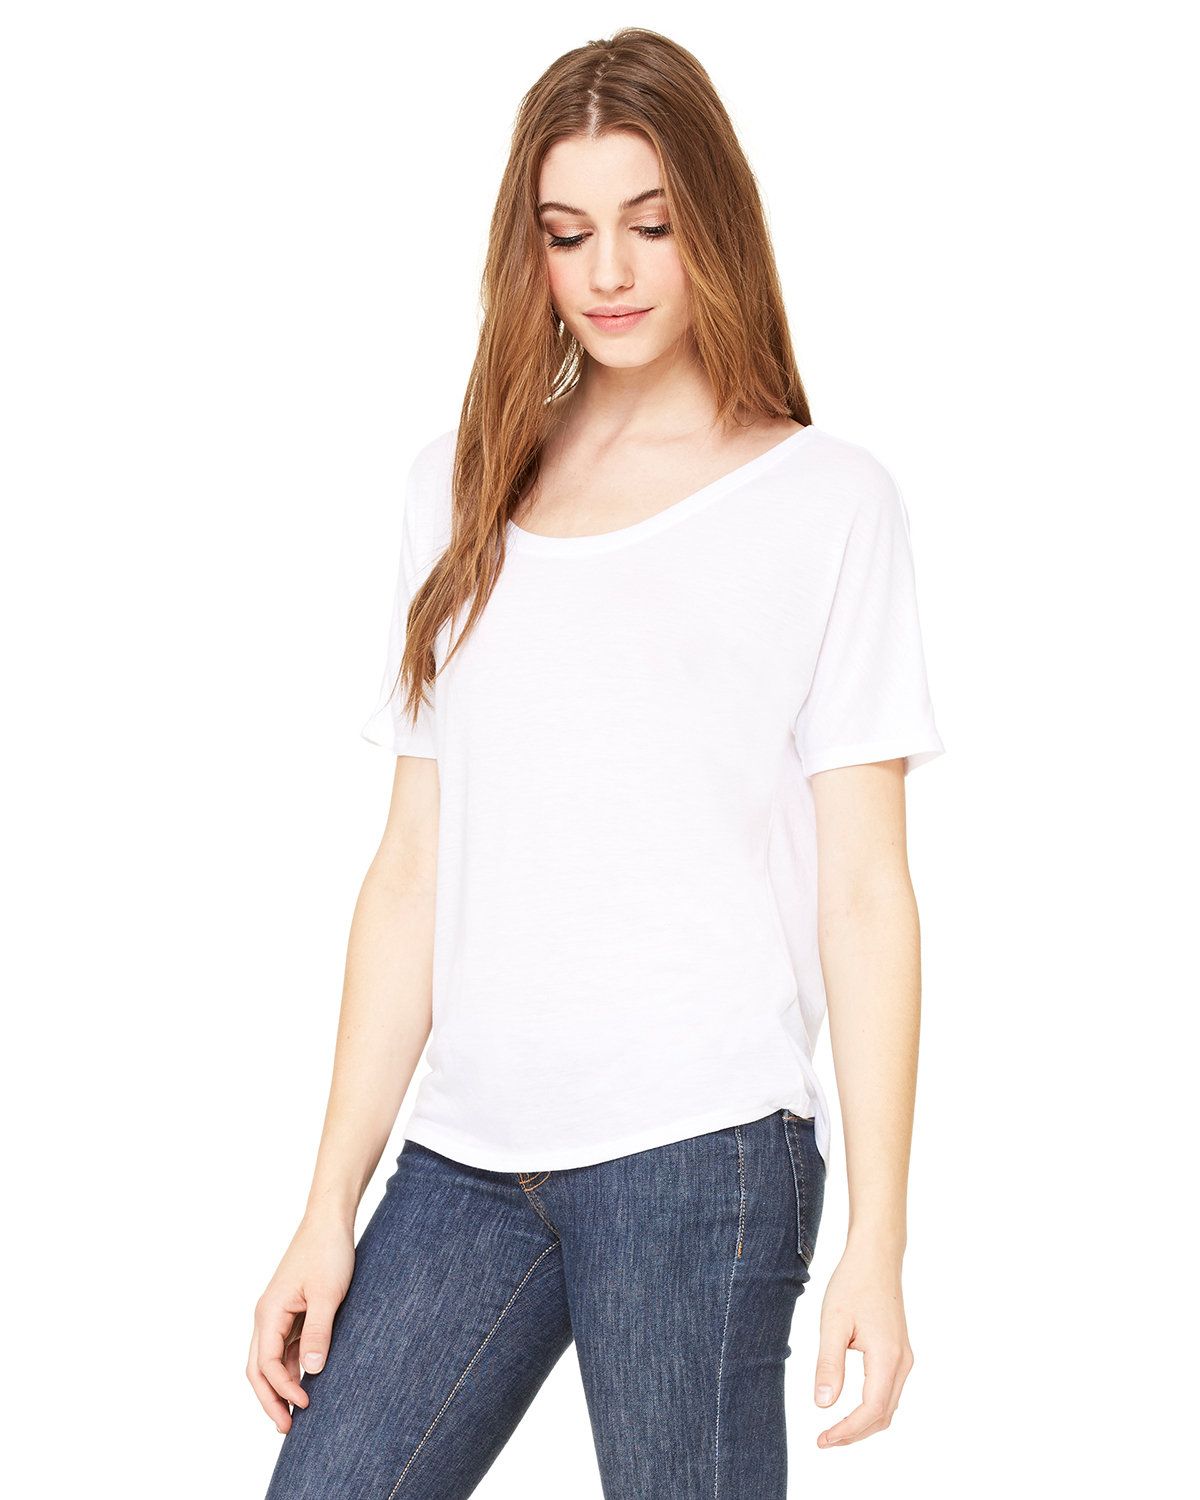 Blank BELLA CANVAS 6400 Women's Relaxed Fit White Tshirts, Very